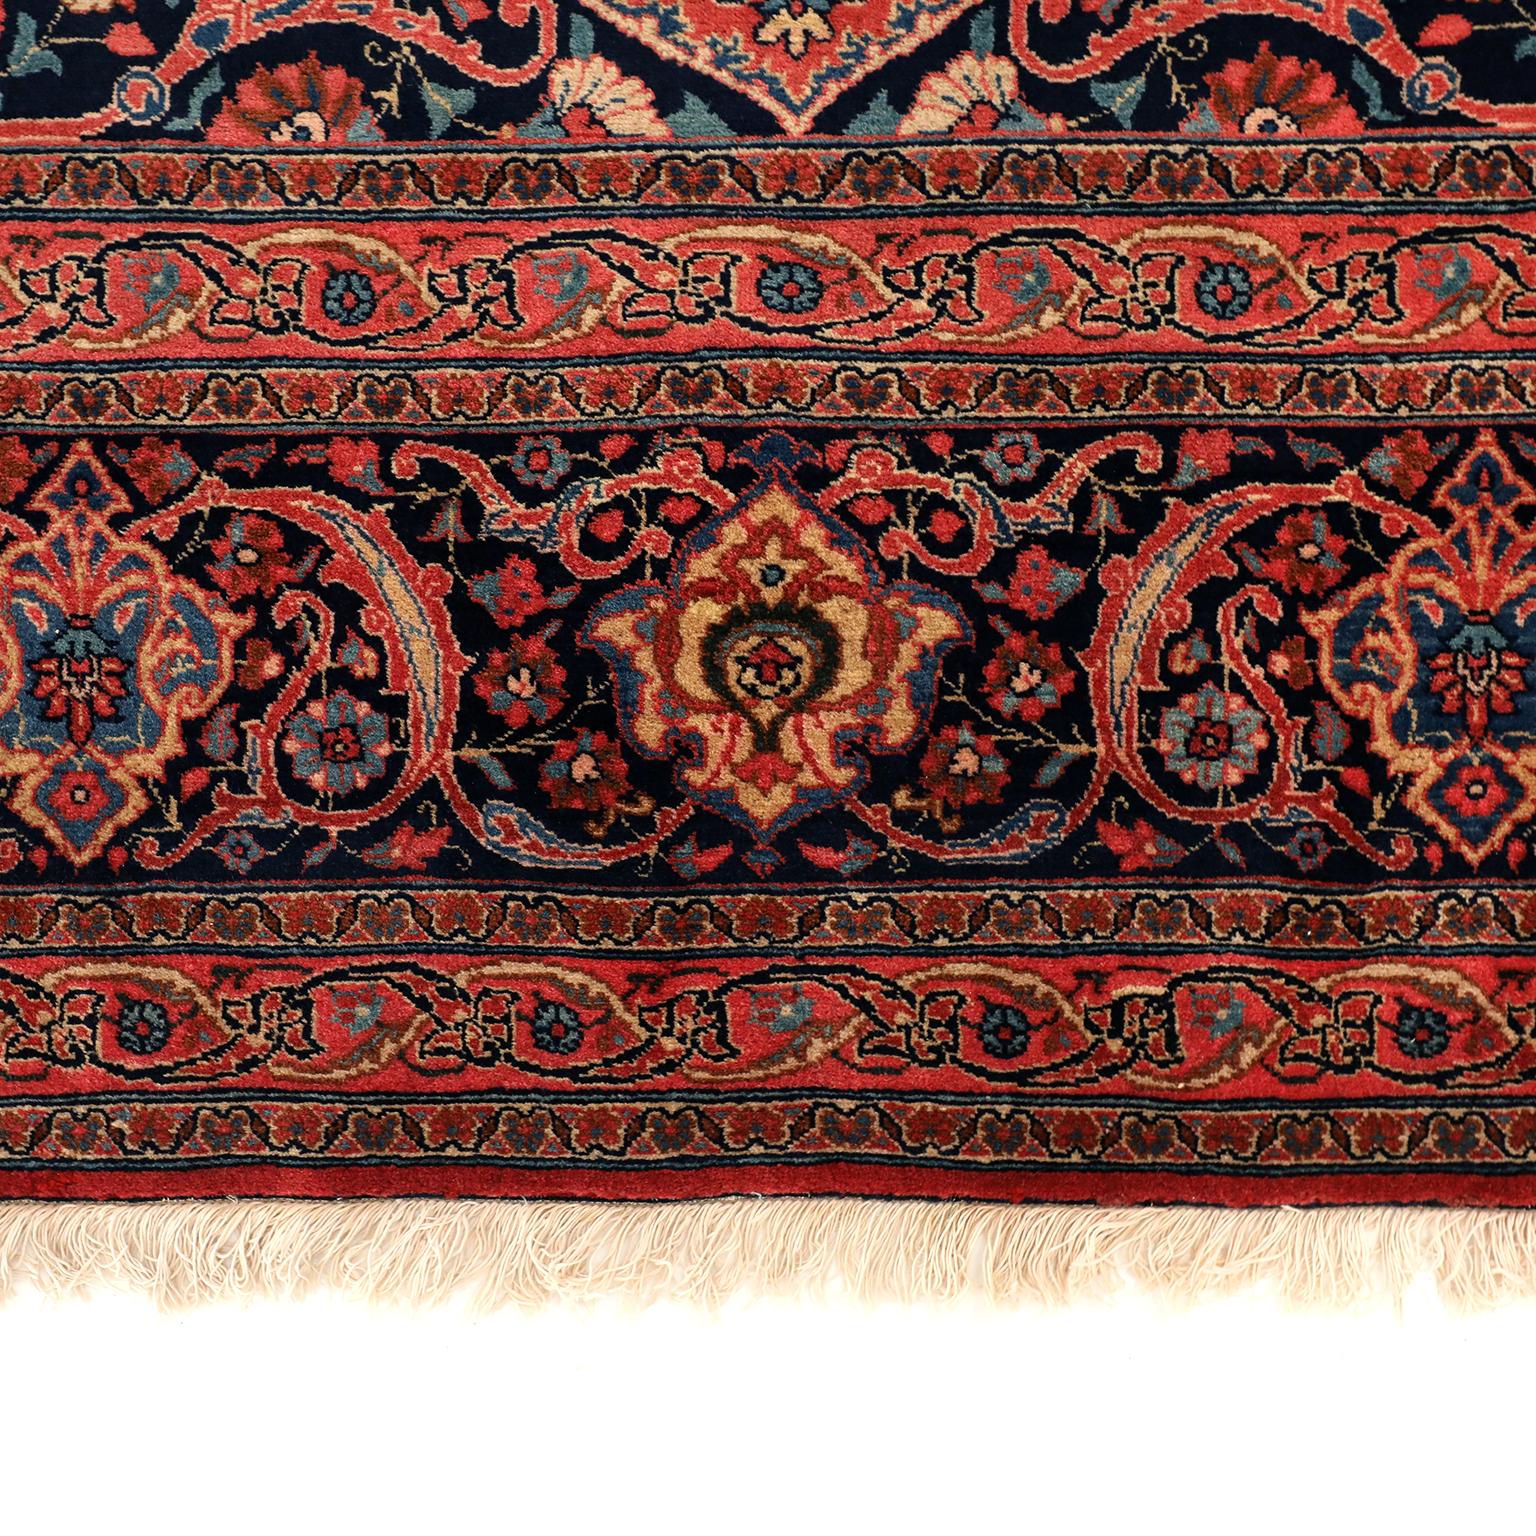 This antique Persian carpet in red and indigo circa 1920 measures 11' x 15' and consists of a handspun hand knotted wool pile and organic vegetable dyes. The shades of red vary throughout the central medallion, field, and border, as the natural